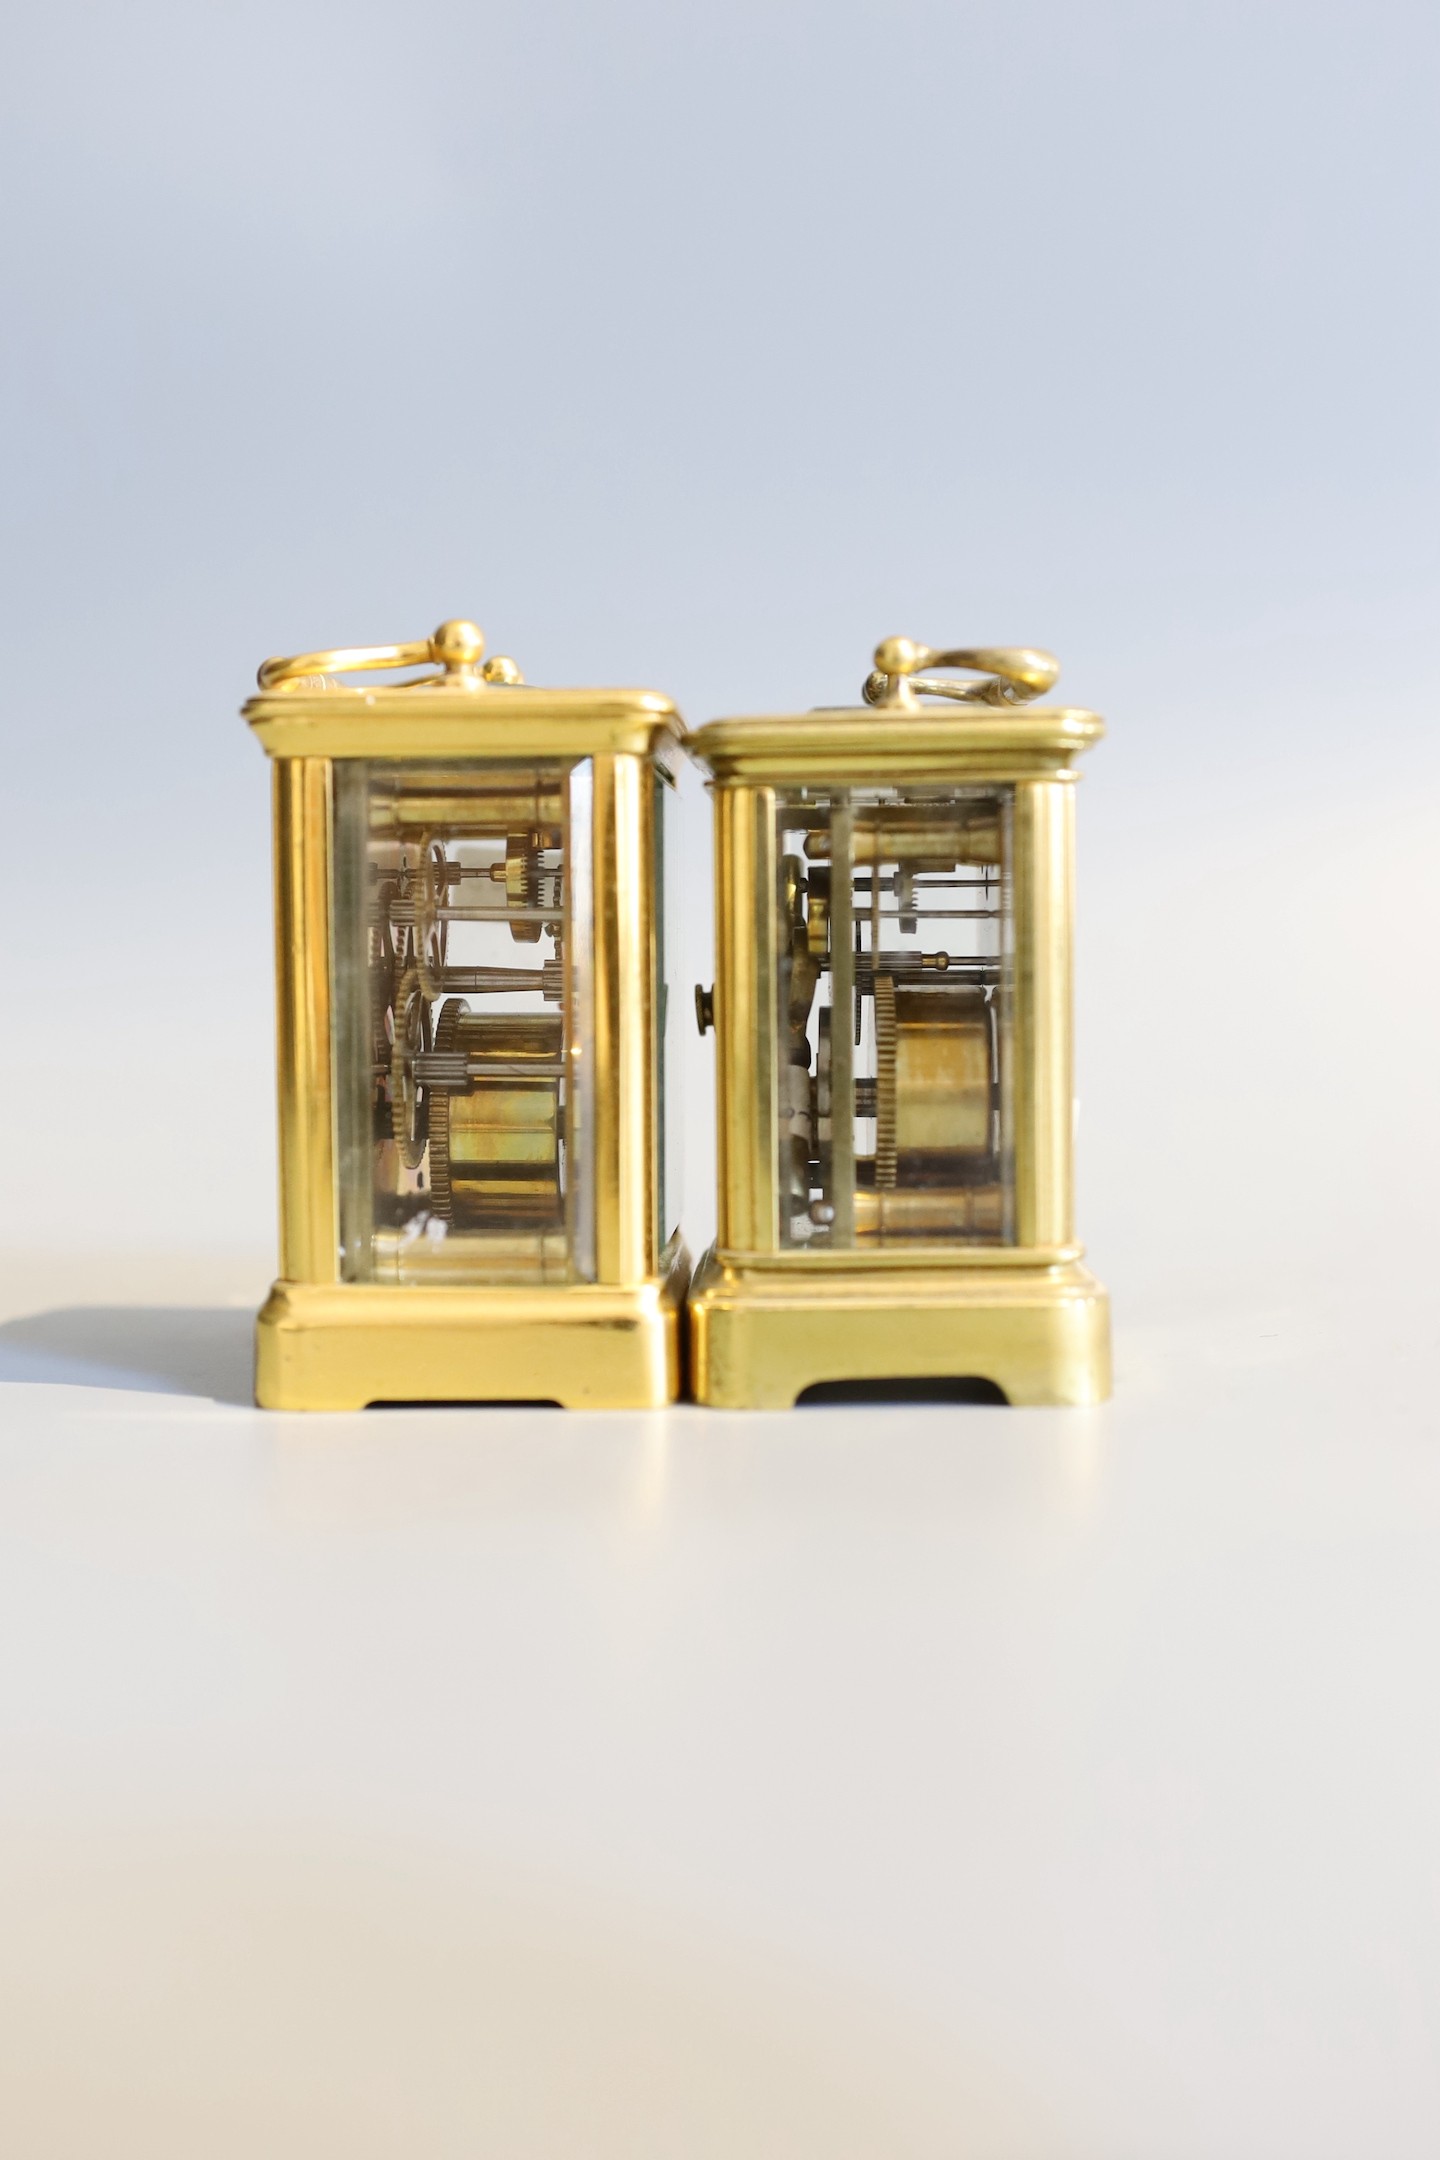 Two late 19th / early 20th century French lacquered brass miniature carriage timepieces, tallest 7cm